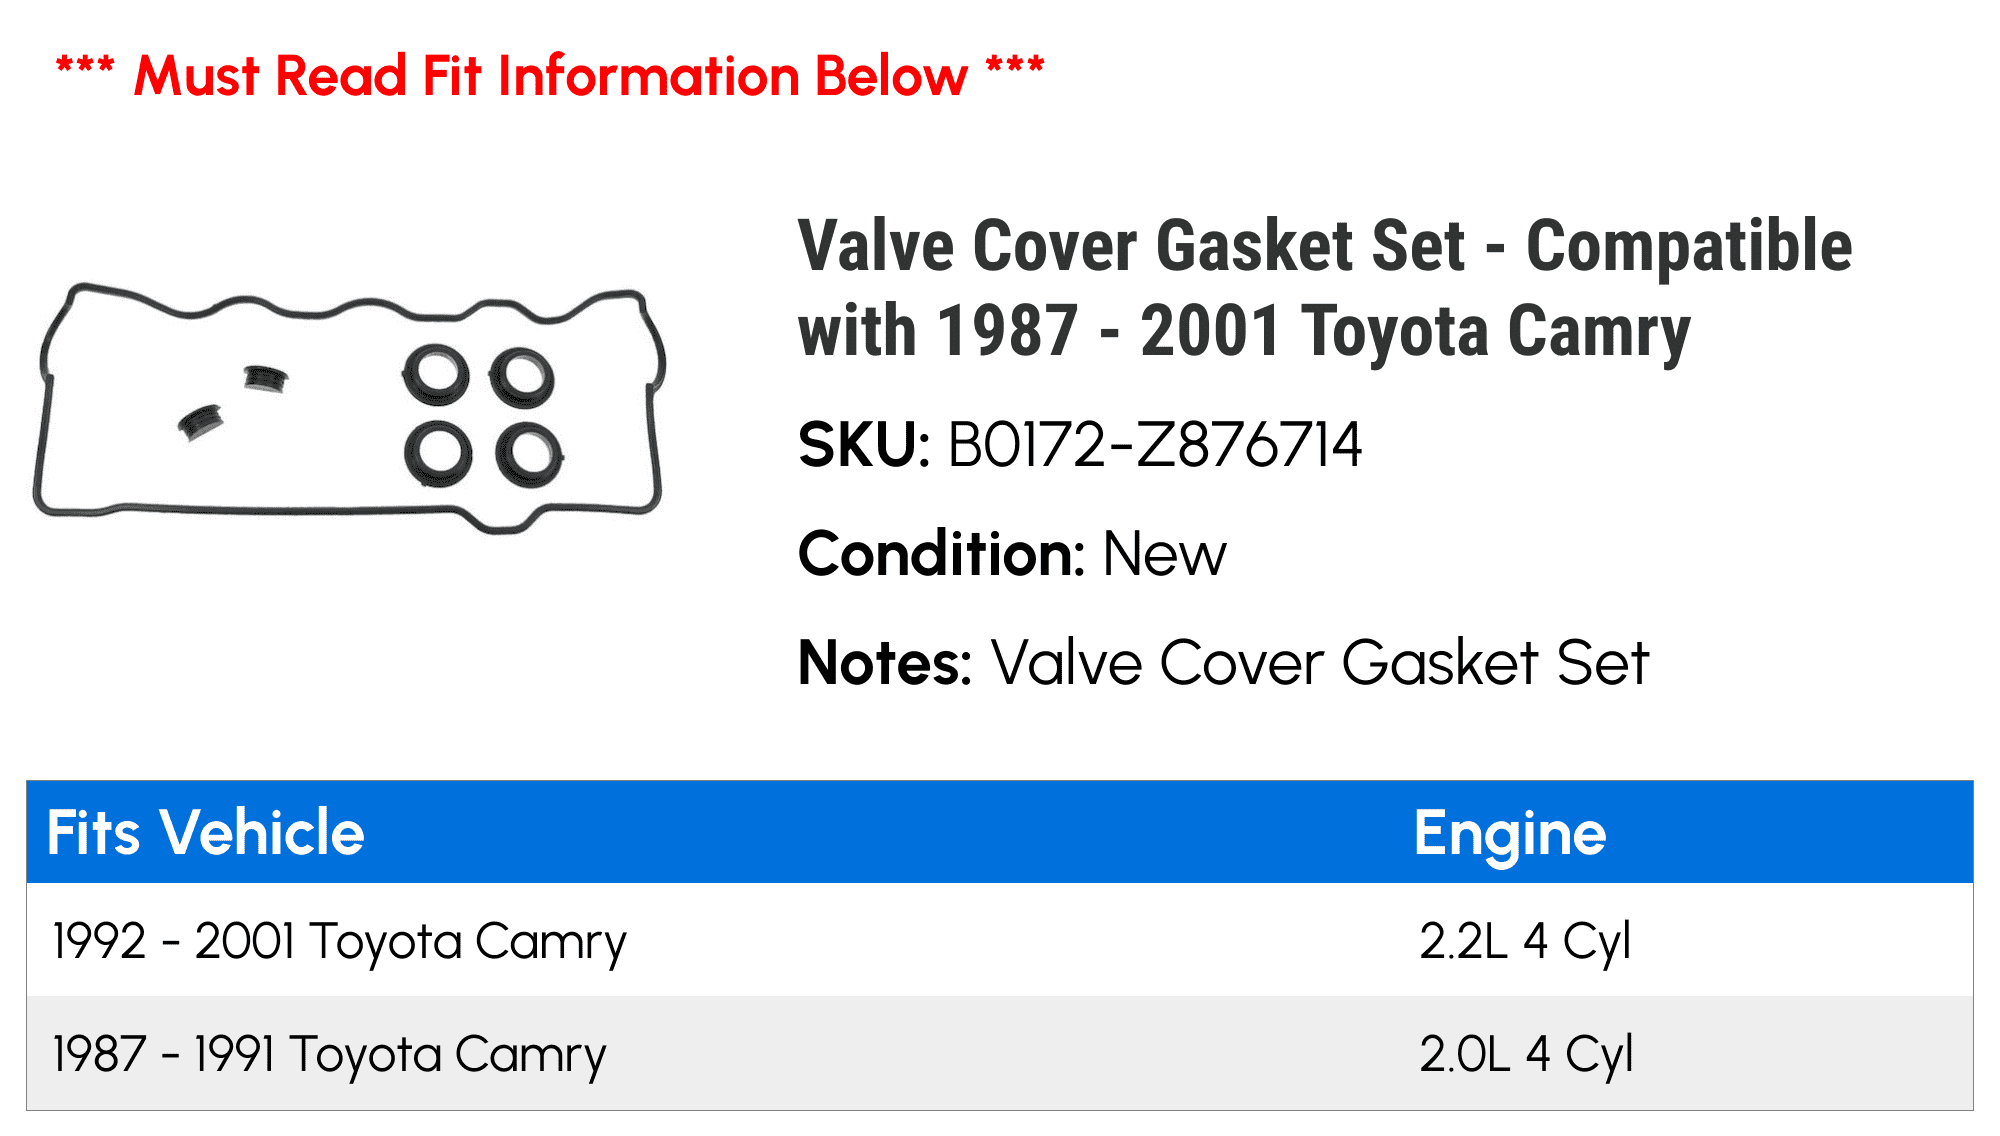 Valve Cover Gasket Set Compatible with 1987 2001 Toyota Camry 1988 1989  1990 1991 1992 1993 1994 1995 1996 1997 1998 1999 2000